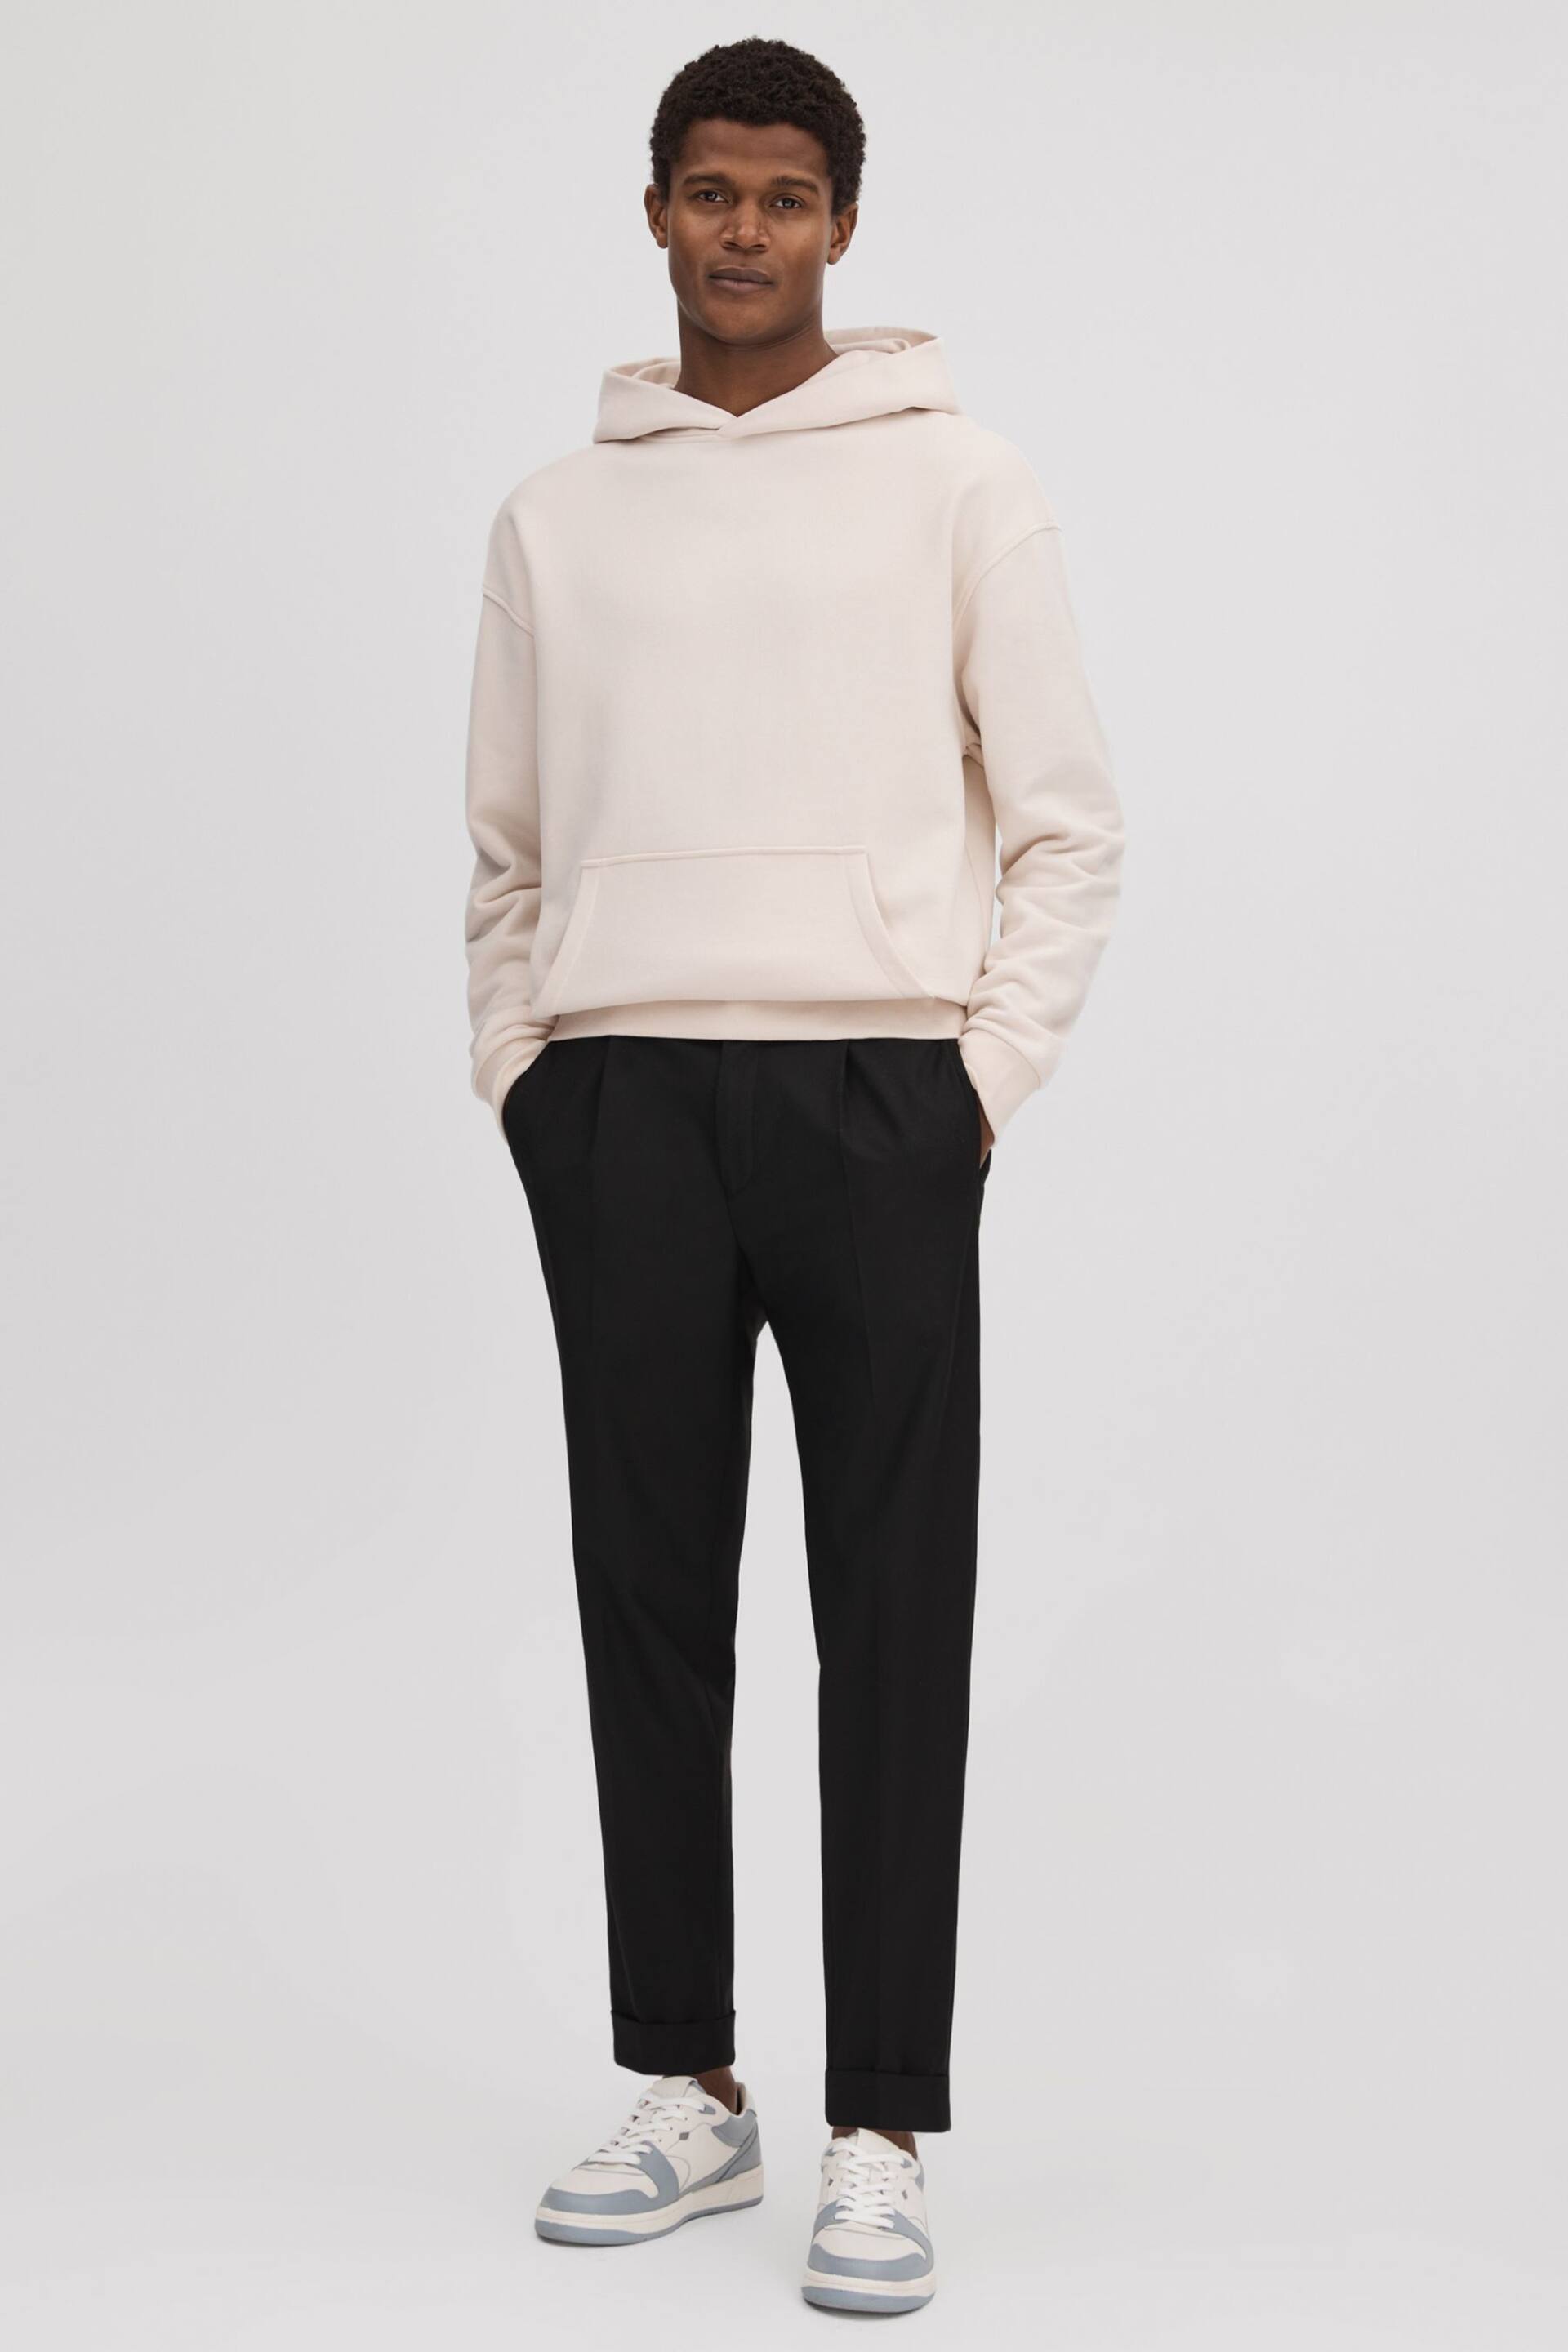 Reiss Off White Alexander Casual Fit Cotton Hoodie - Image 6 of 6